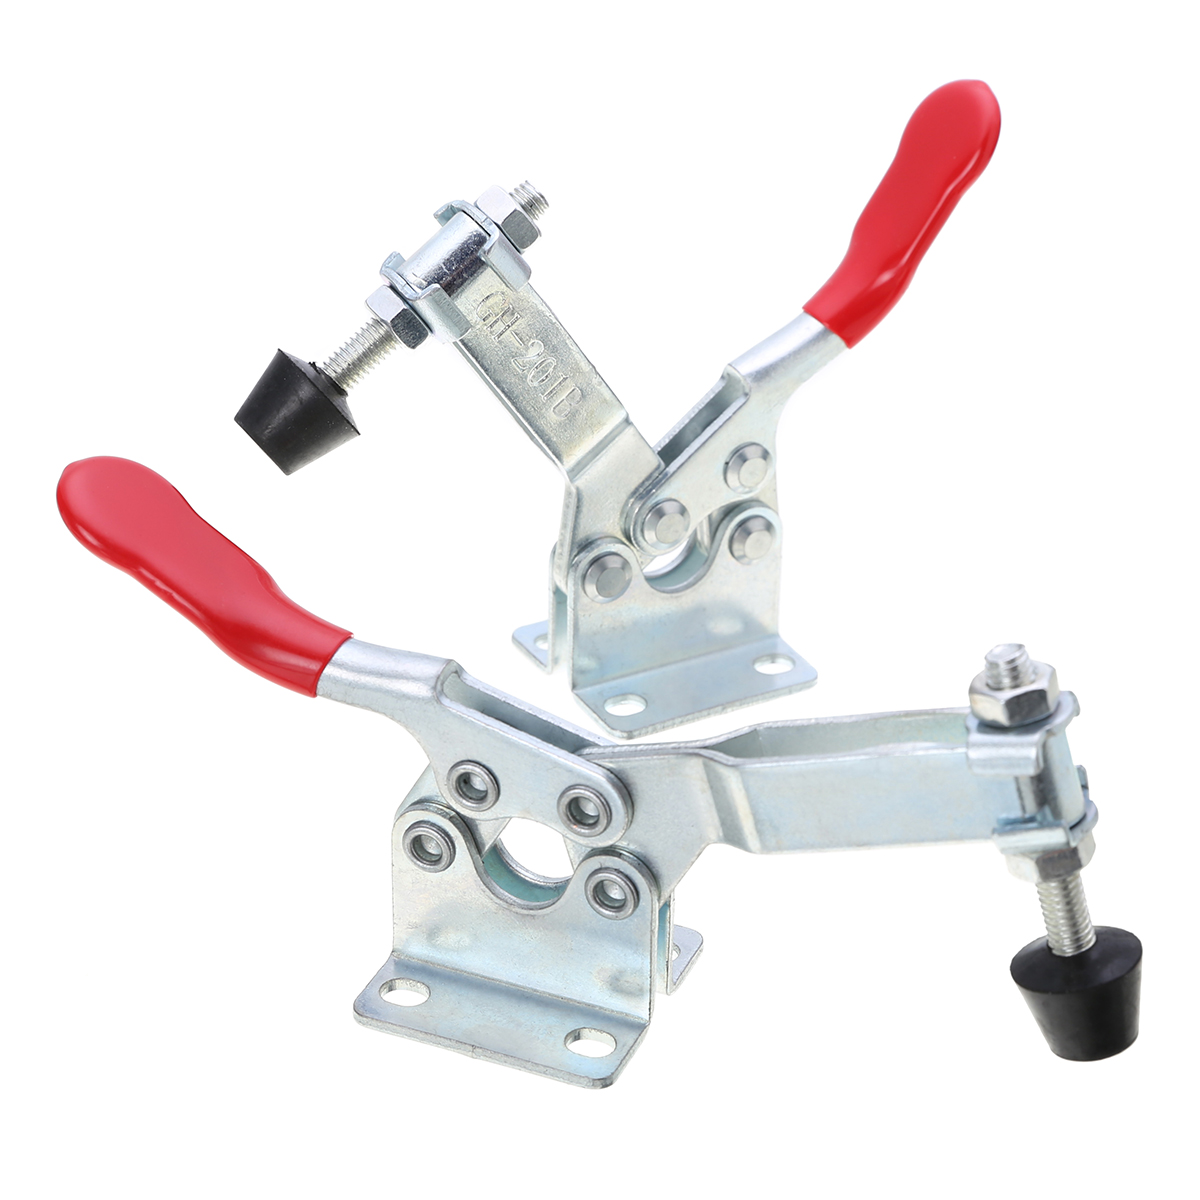 4pcs GH-201B Horizontal Toggle Clamp 90Kg 198Lbs Holding Capacity Quick Release Hand Tool Set